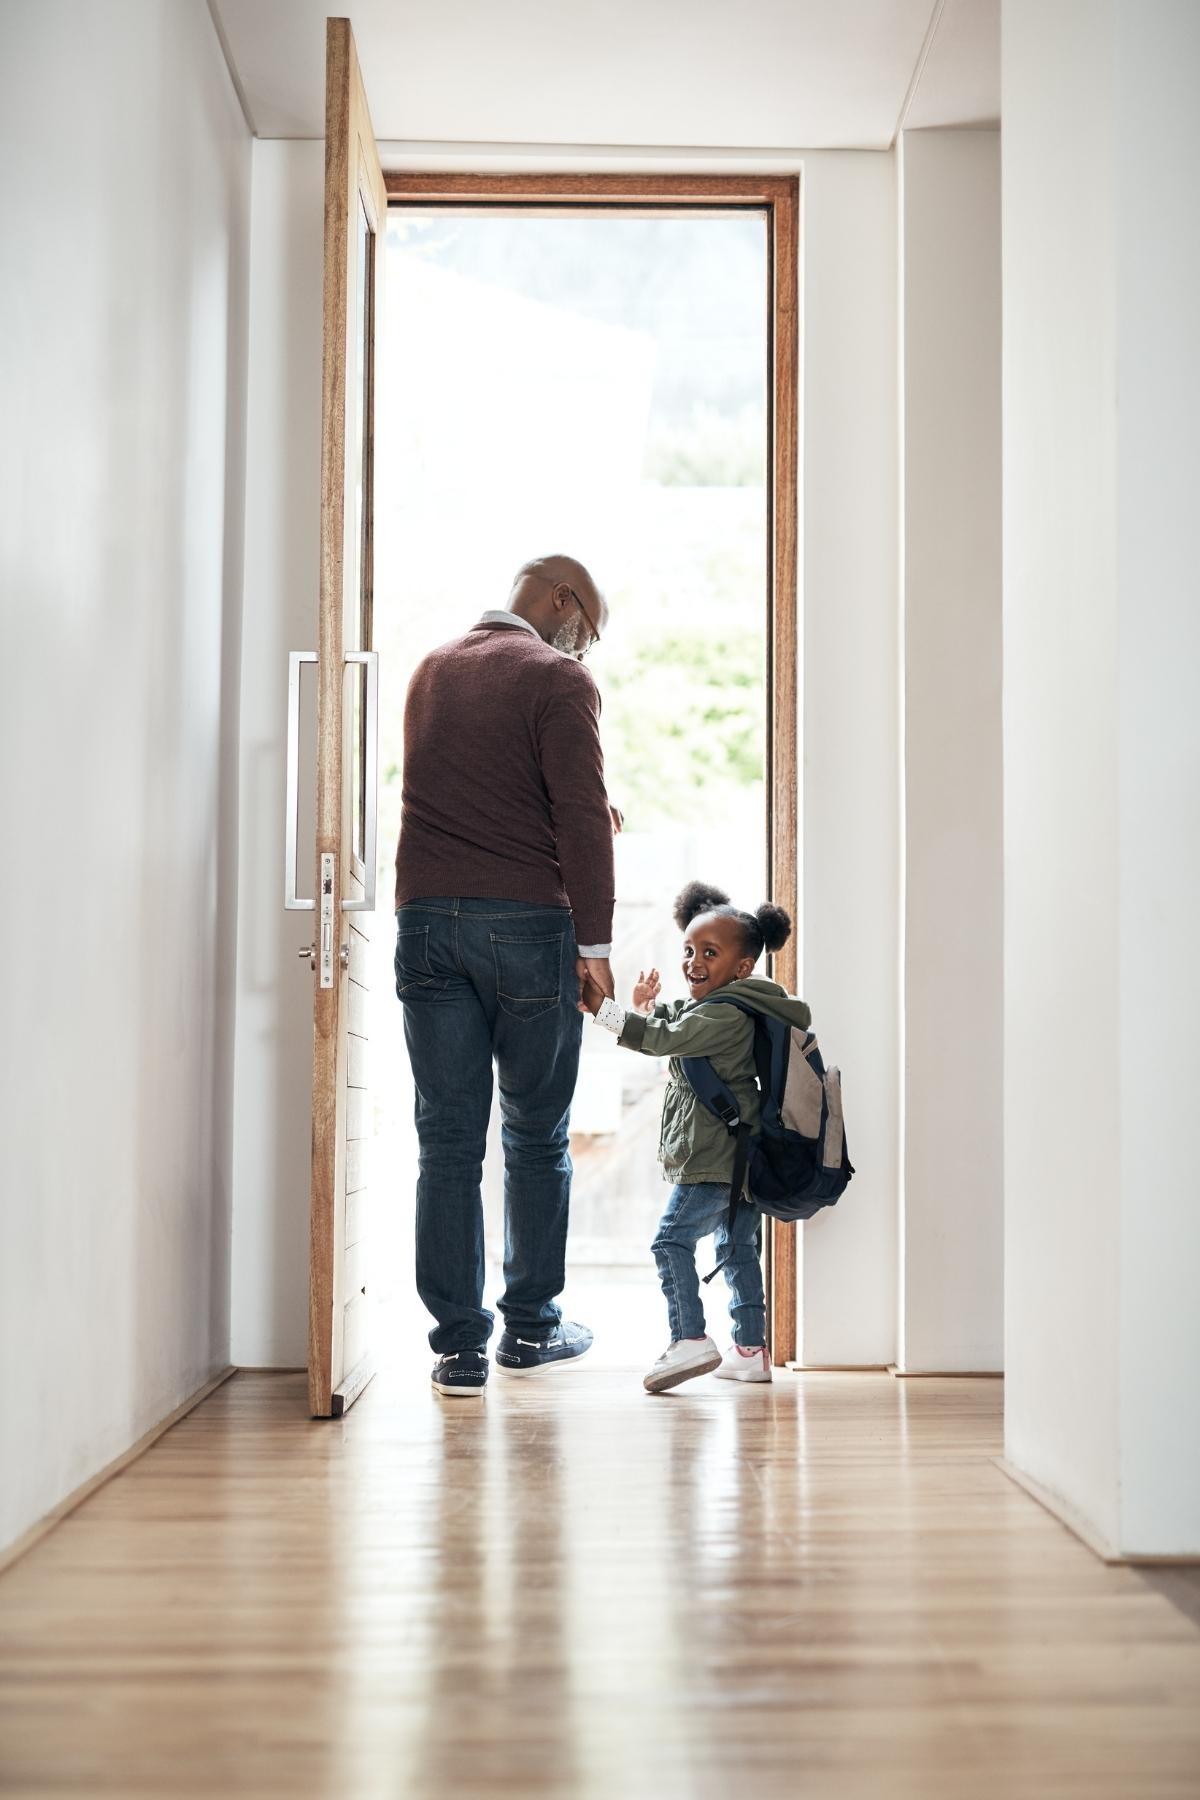 Want to ensure your child's first day of school is memorable? Our article "25 Questions to Ask Your Kids on the First Day of School" offers a variety of questions that will help you connect on a deeper level and understand their school day better.